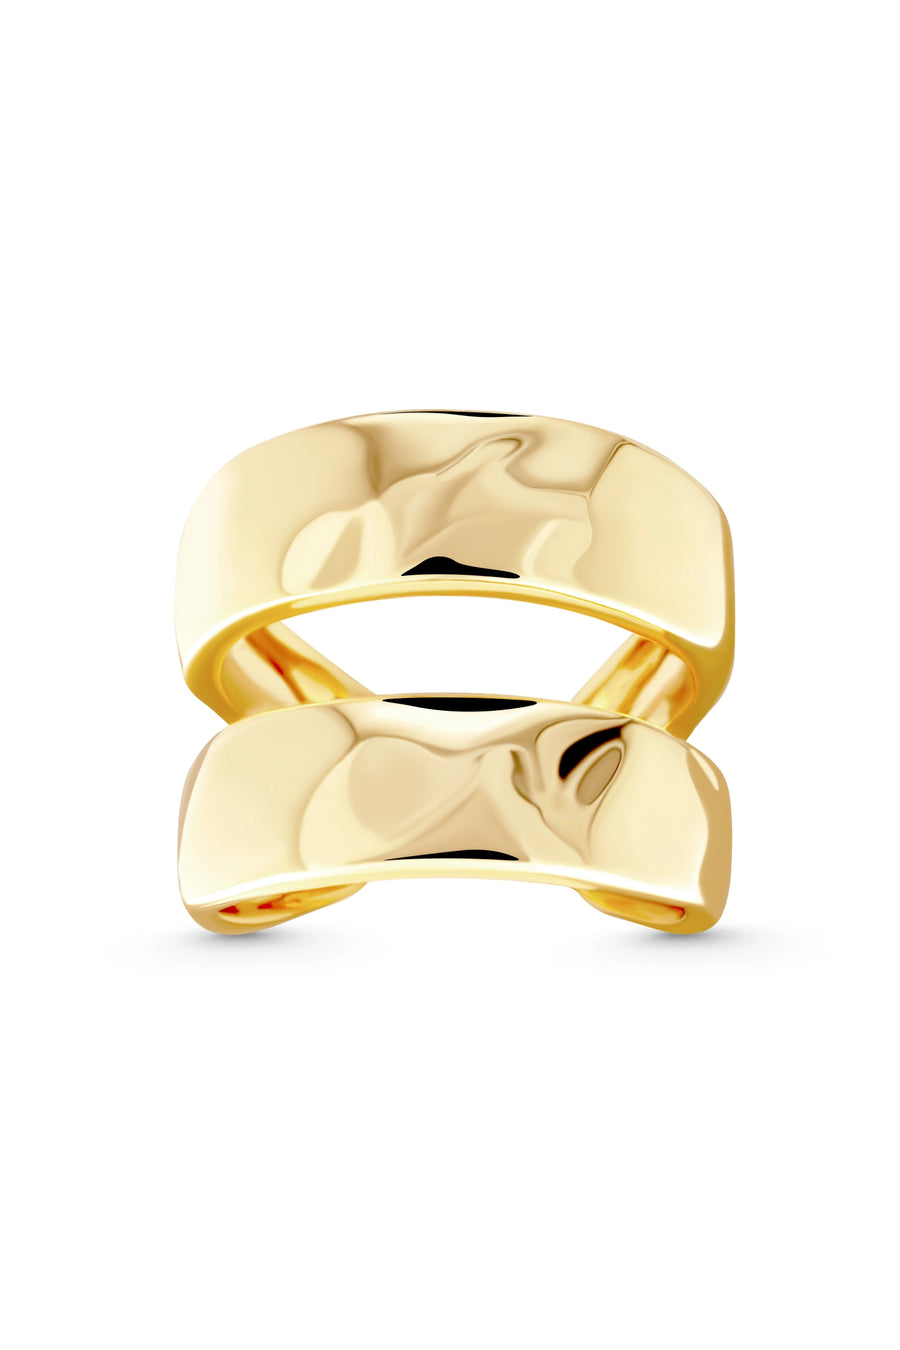 EMPRESS Ring. Double band ring, open-ended, can fit on US sizes 5-7, 18K gold vermeil, handmade, hypoallergenic, water-resistant